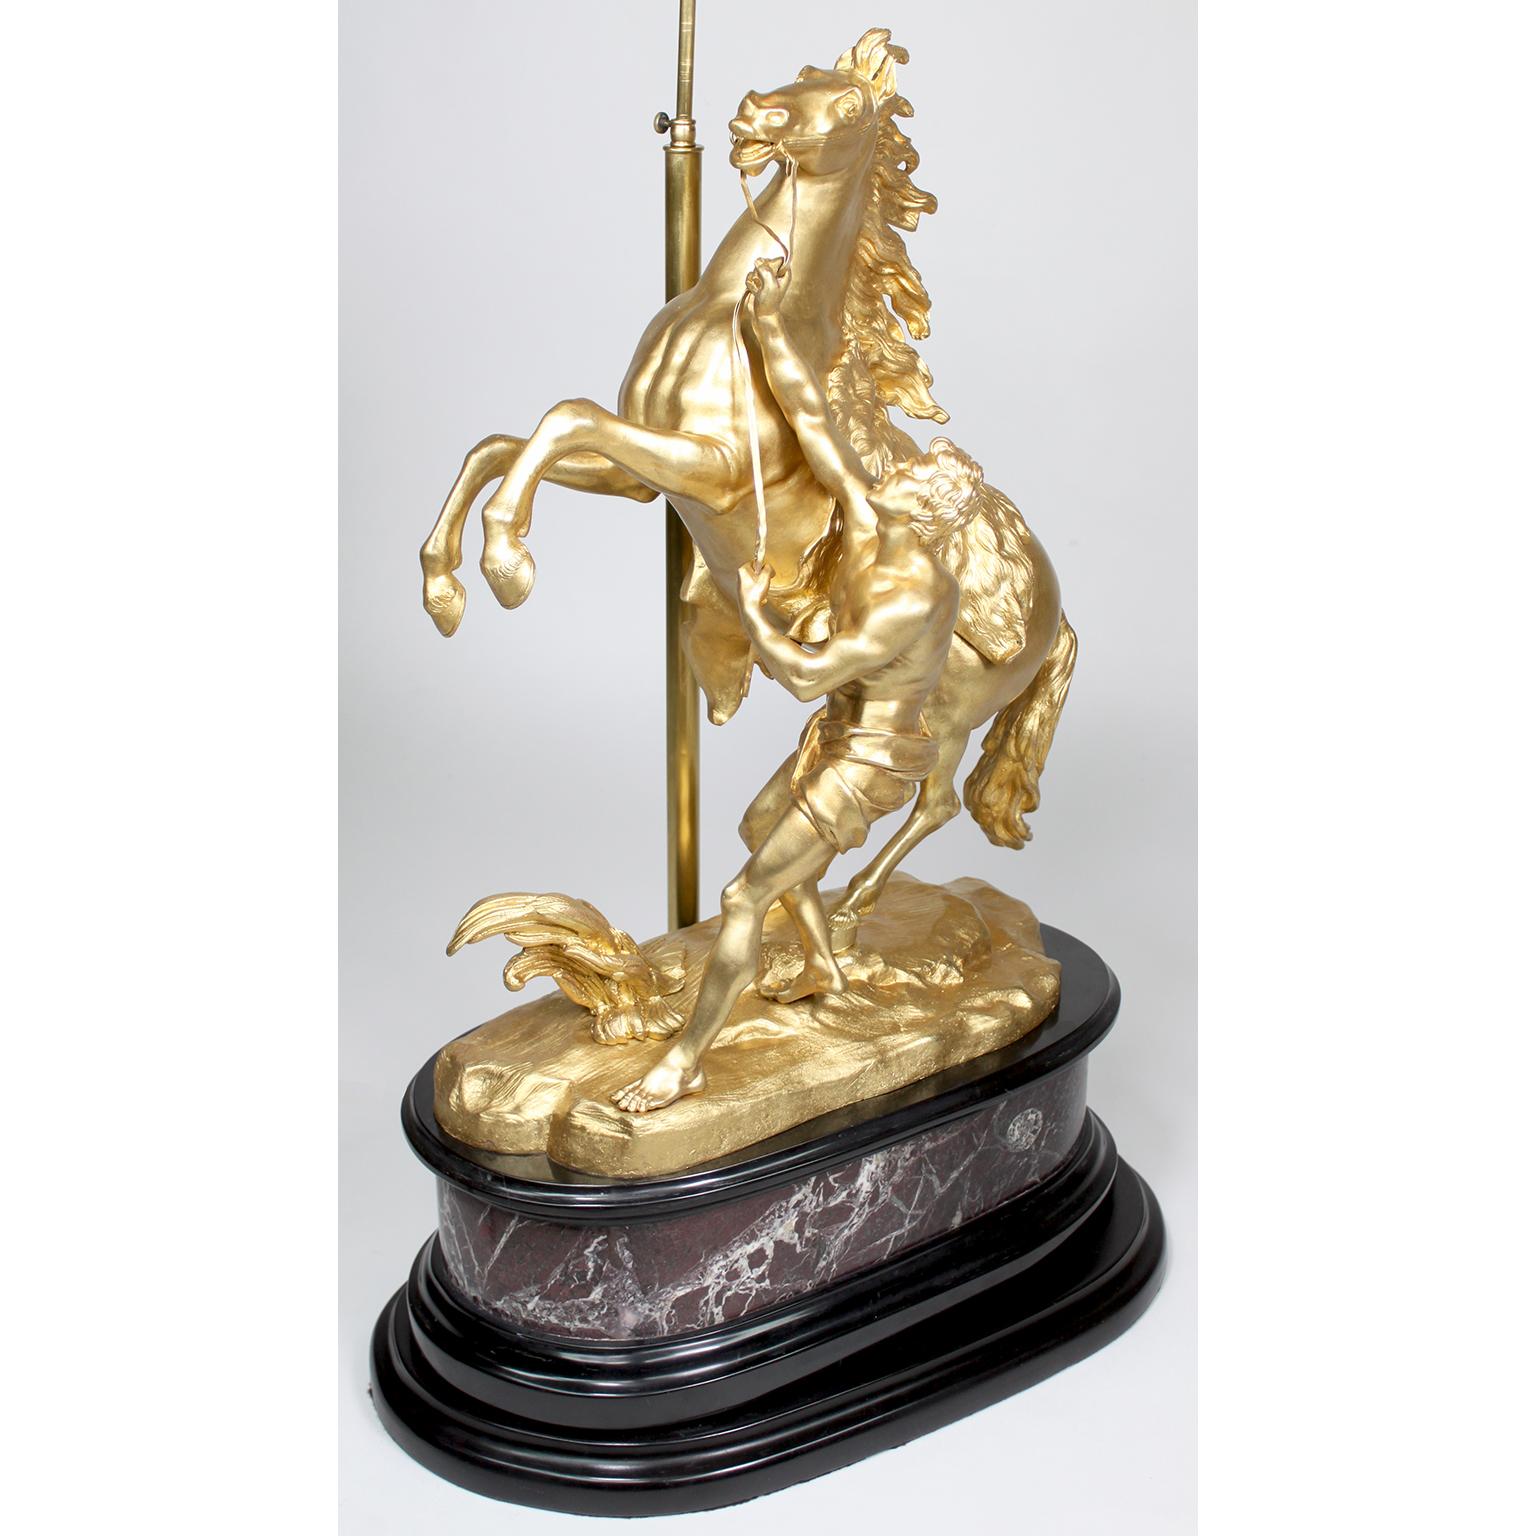 Early 20th Century Pair French 19th/20th Century Gilt-Bronze Sculptures of The Marly Horses Lamps For Sale